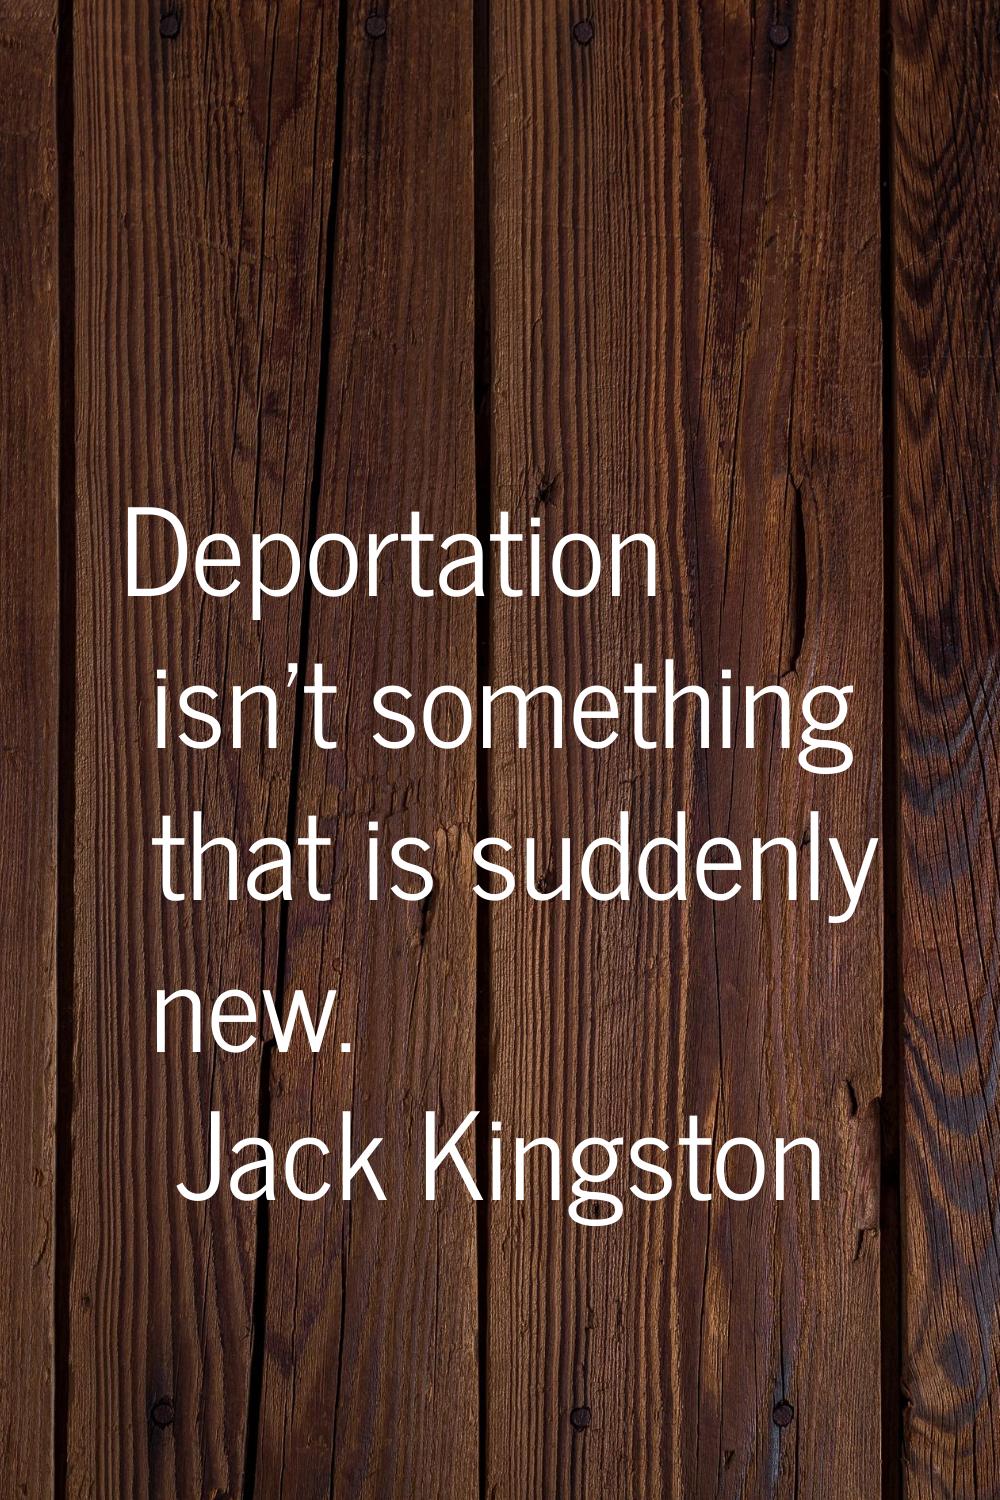 Deportation isn't something that is suddenly new.